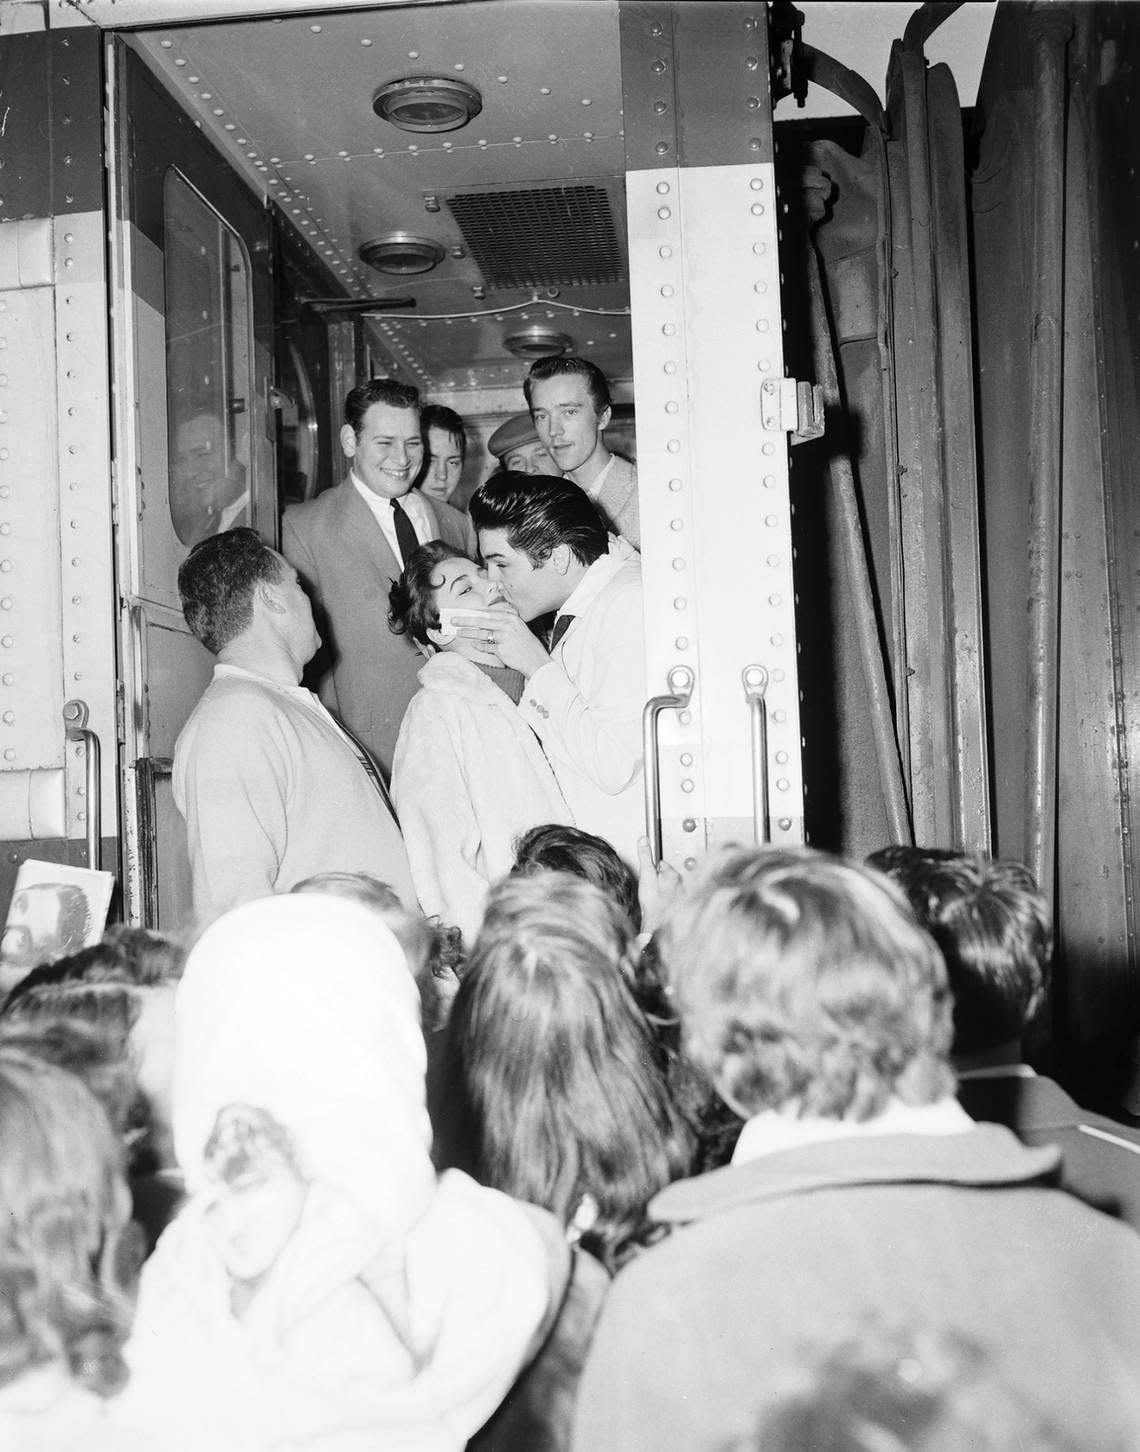 Jan. 11, 1958: Elvis Presley kisses 14-year-old Mary Savage during a stopover on the train in Fort Worth. Ken Moore, a Fort Worth associate of Presley, is at foot of steps.